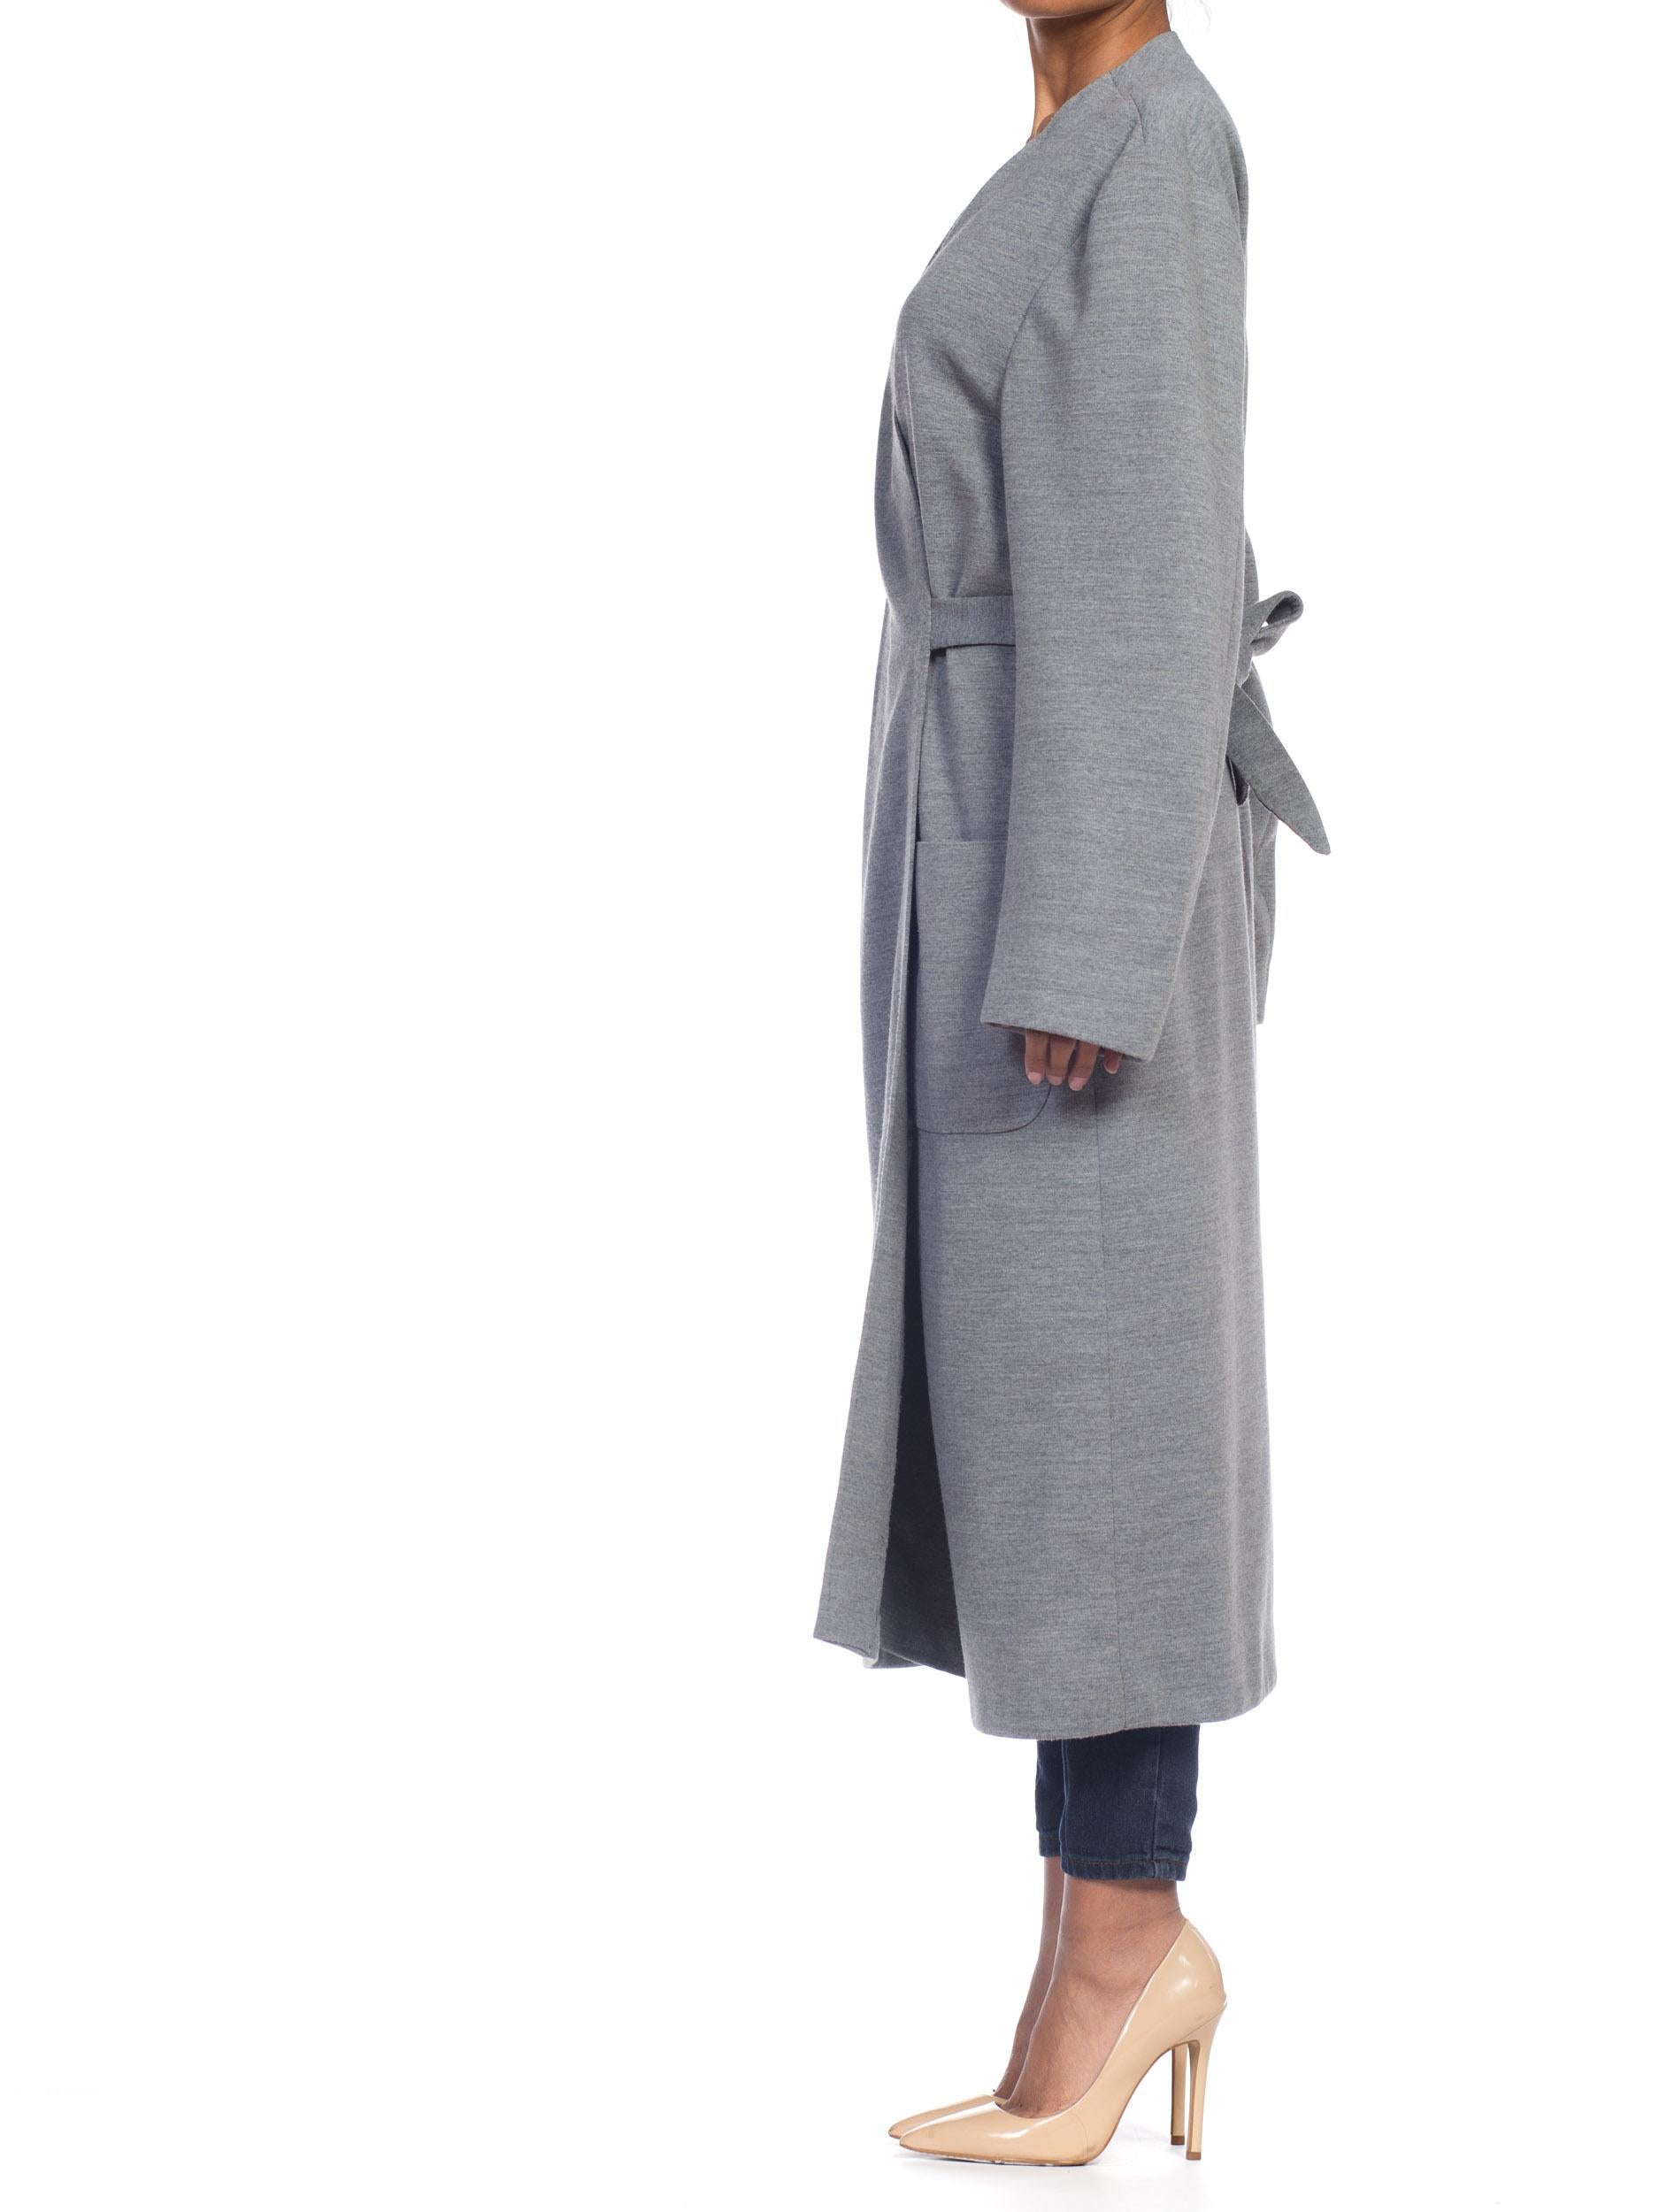 1980S Heather Grey Wool Knit Handmade Unlabeled Couture Wrap Sweater Coat For Sale 5